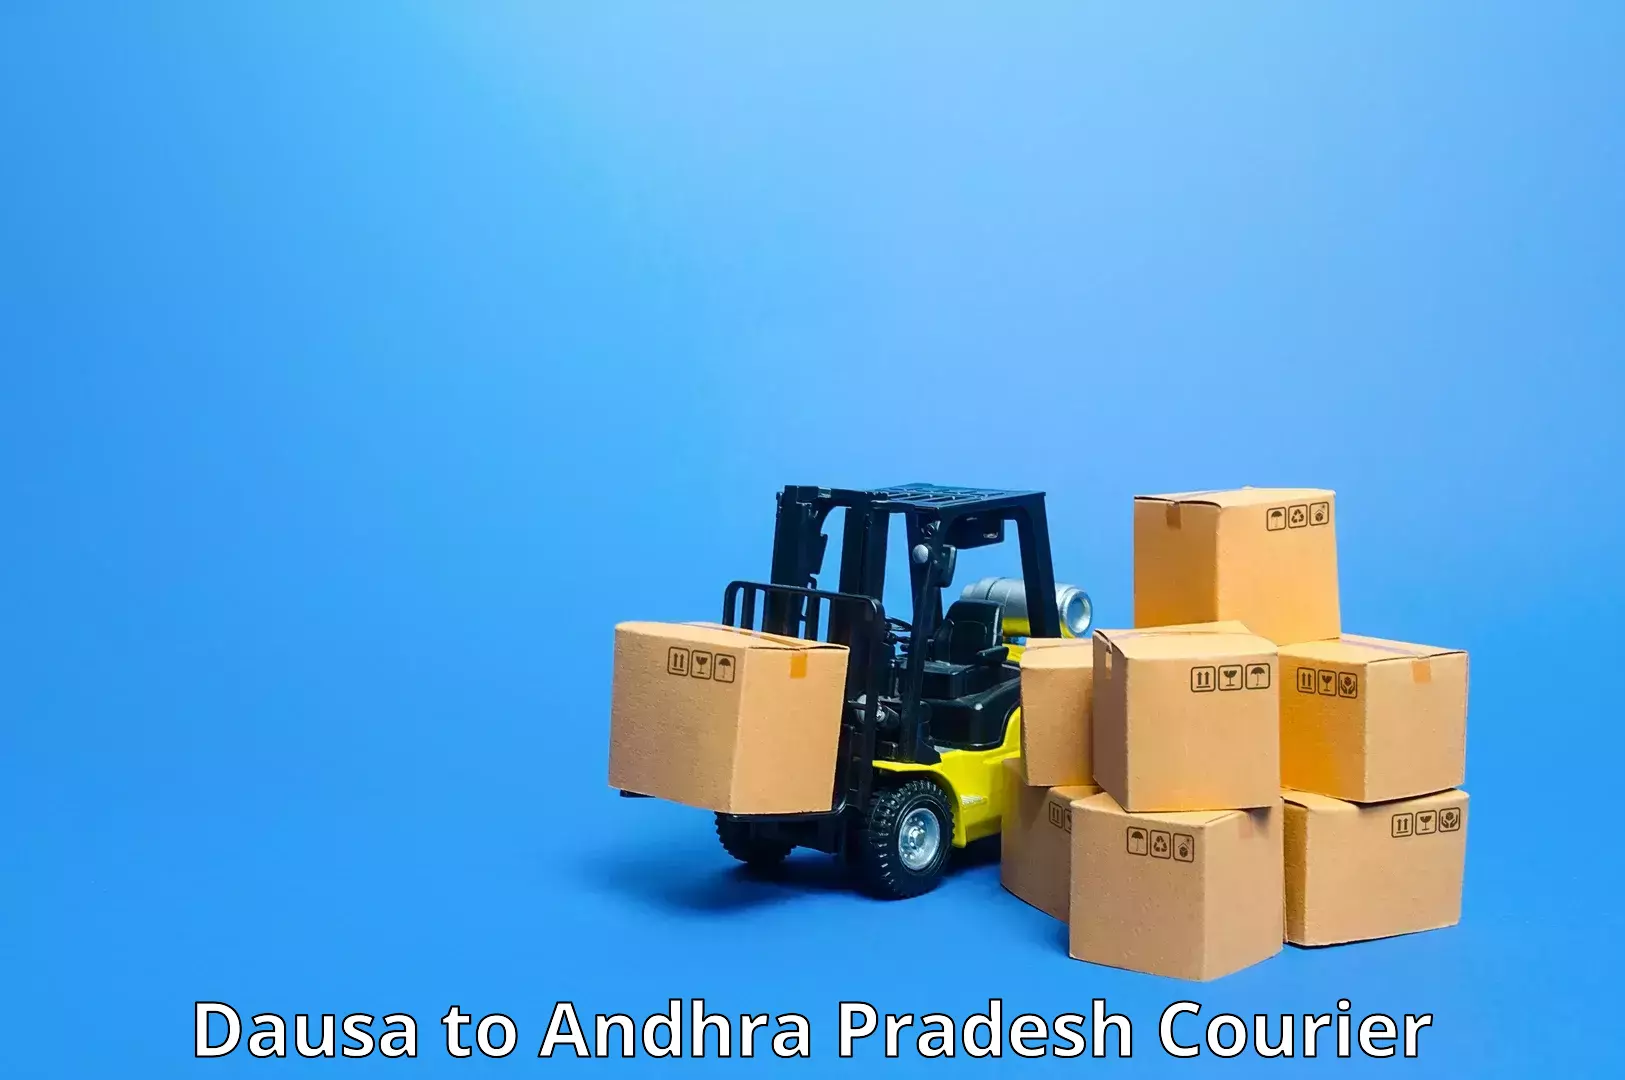 Same-day delivery solutions Dausa to Gudivada